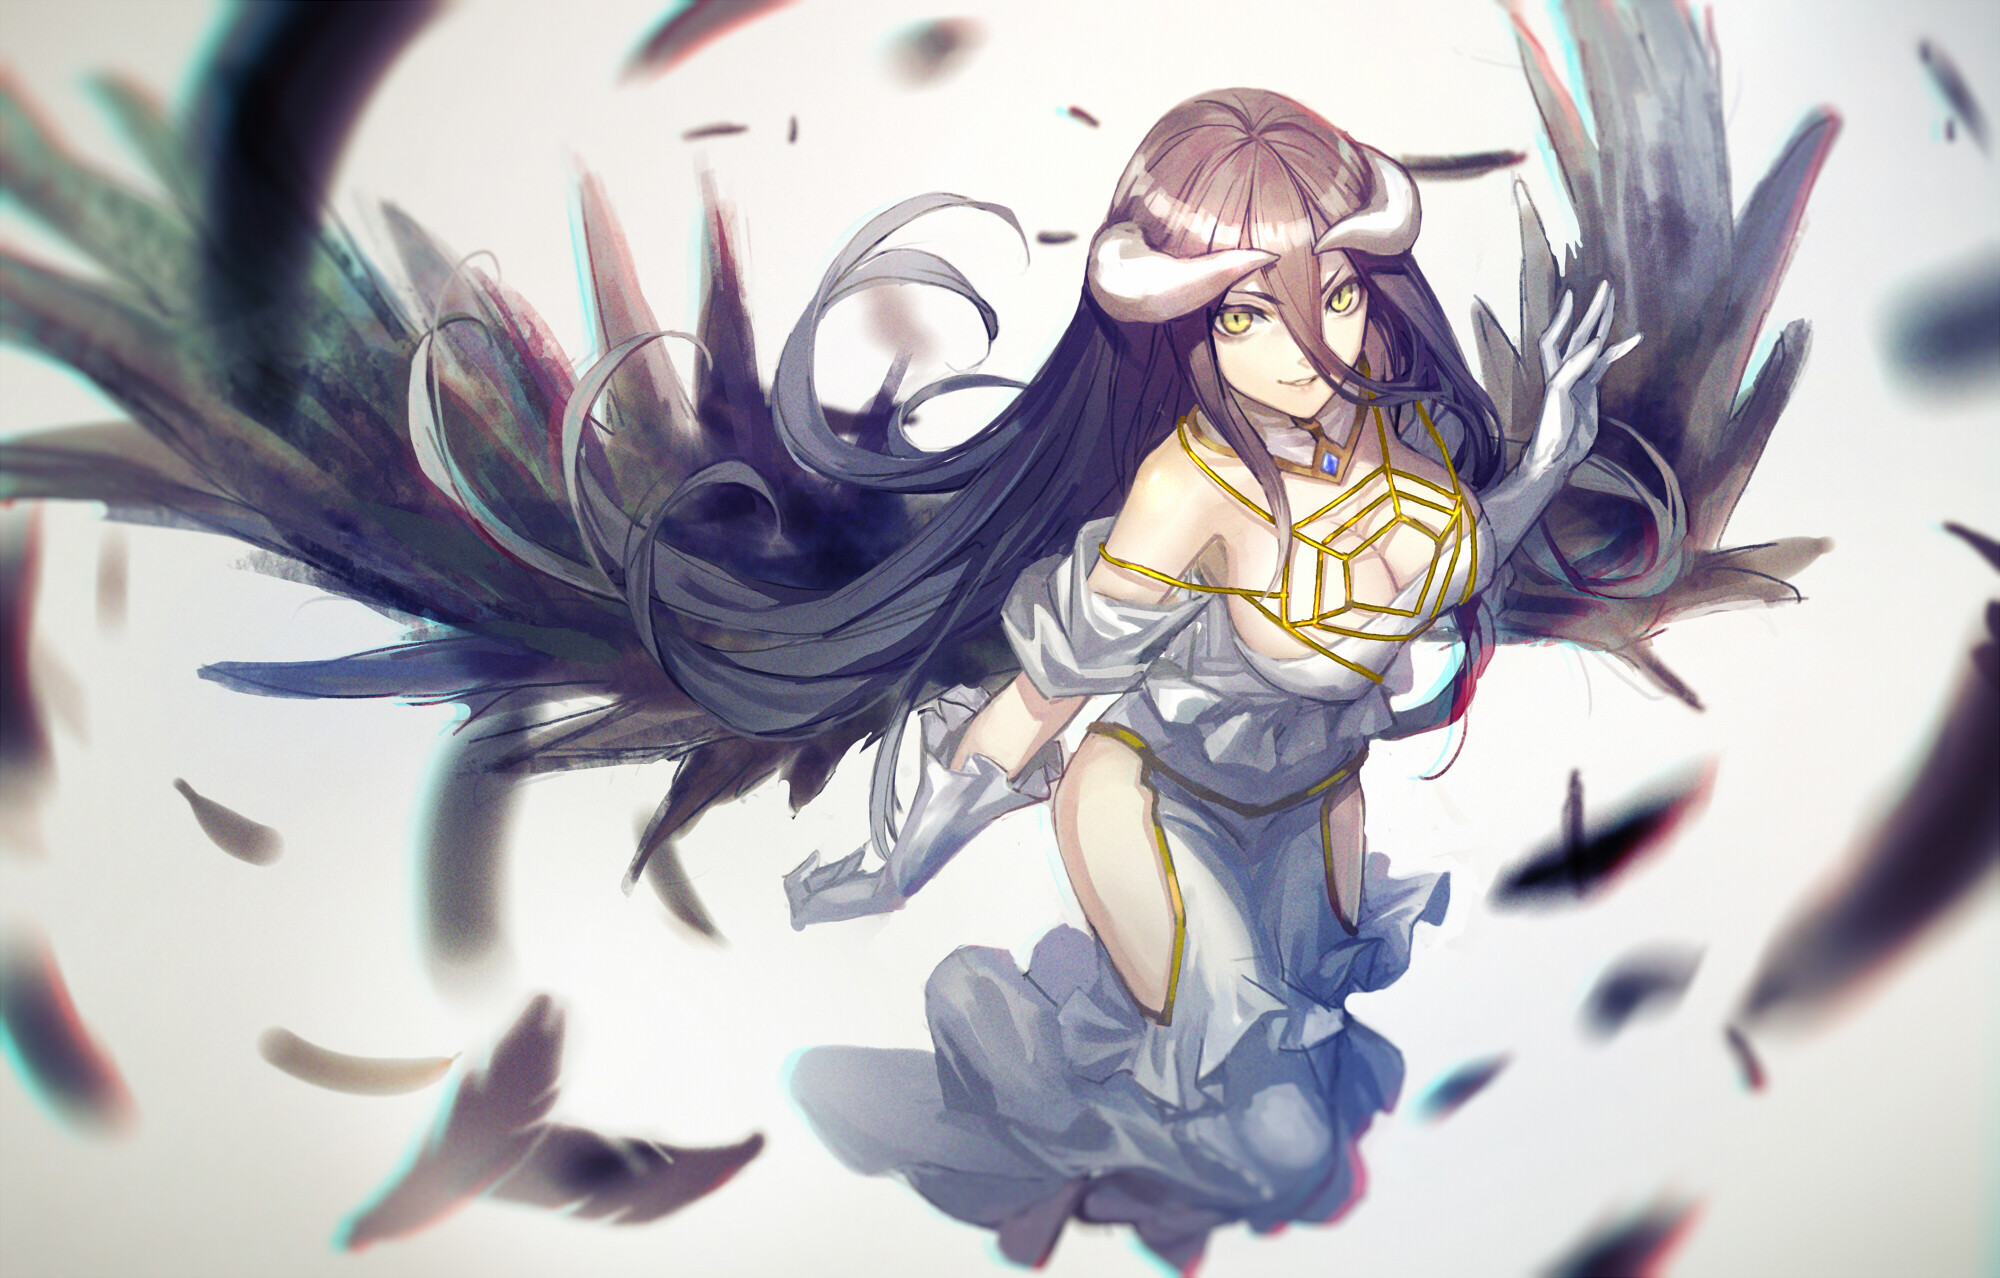 Overlord: Albedo, responsible for general management and supervision of the Floor Guardians. 2000x1280 HD Wallpaper.